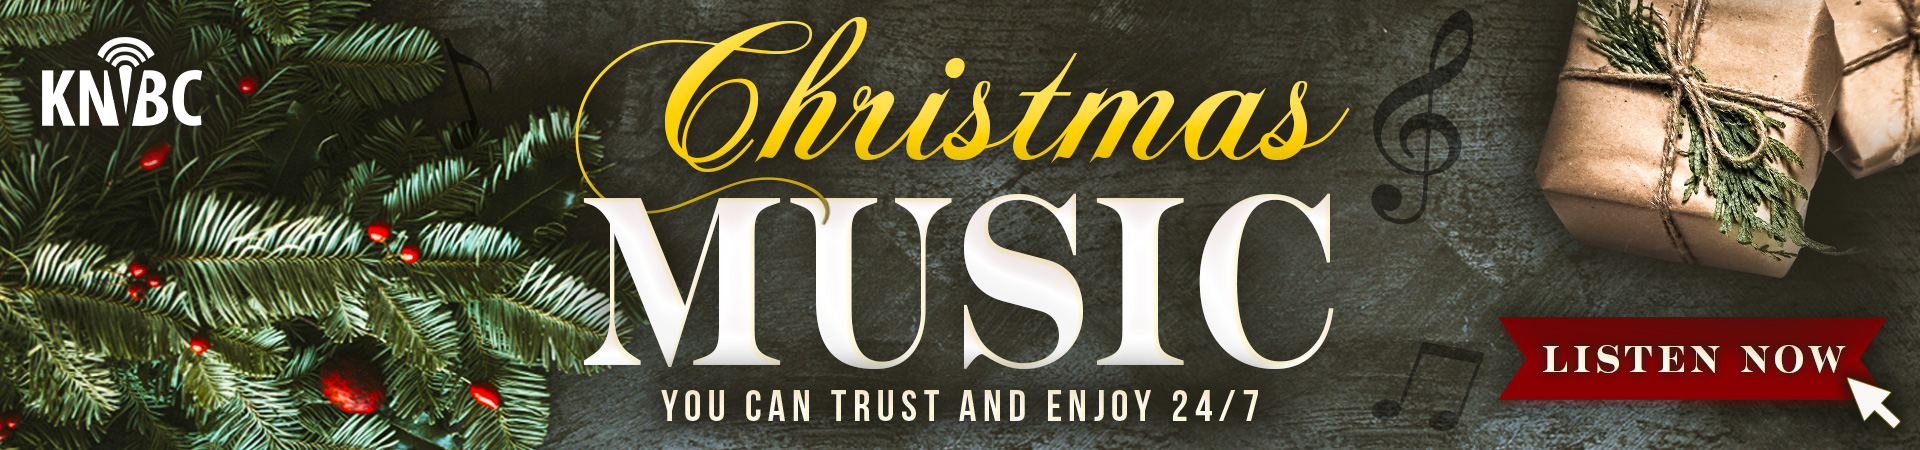 24/7 Christmas Music You Can Trust and Enjoy